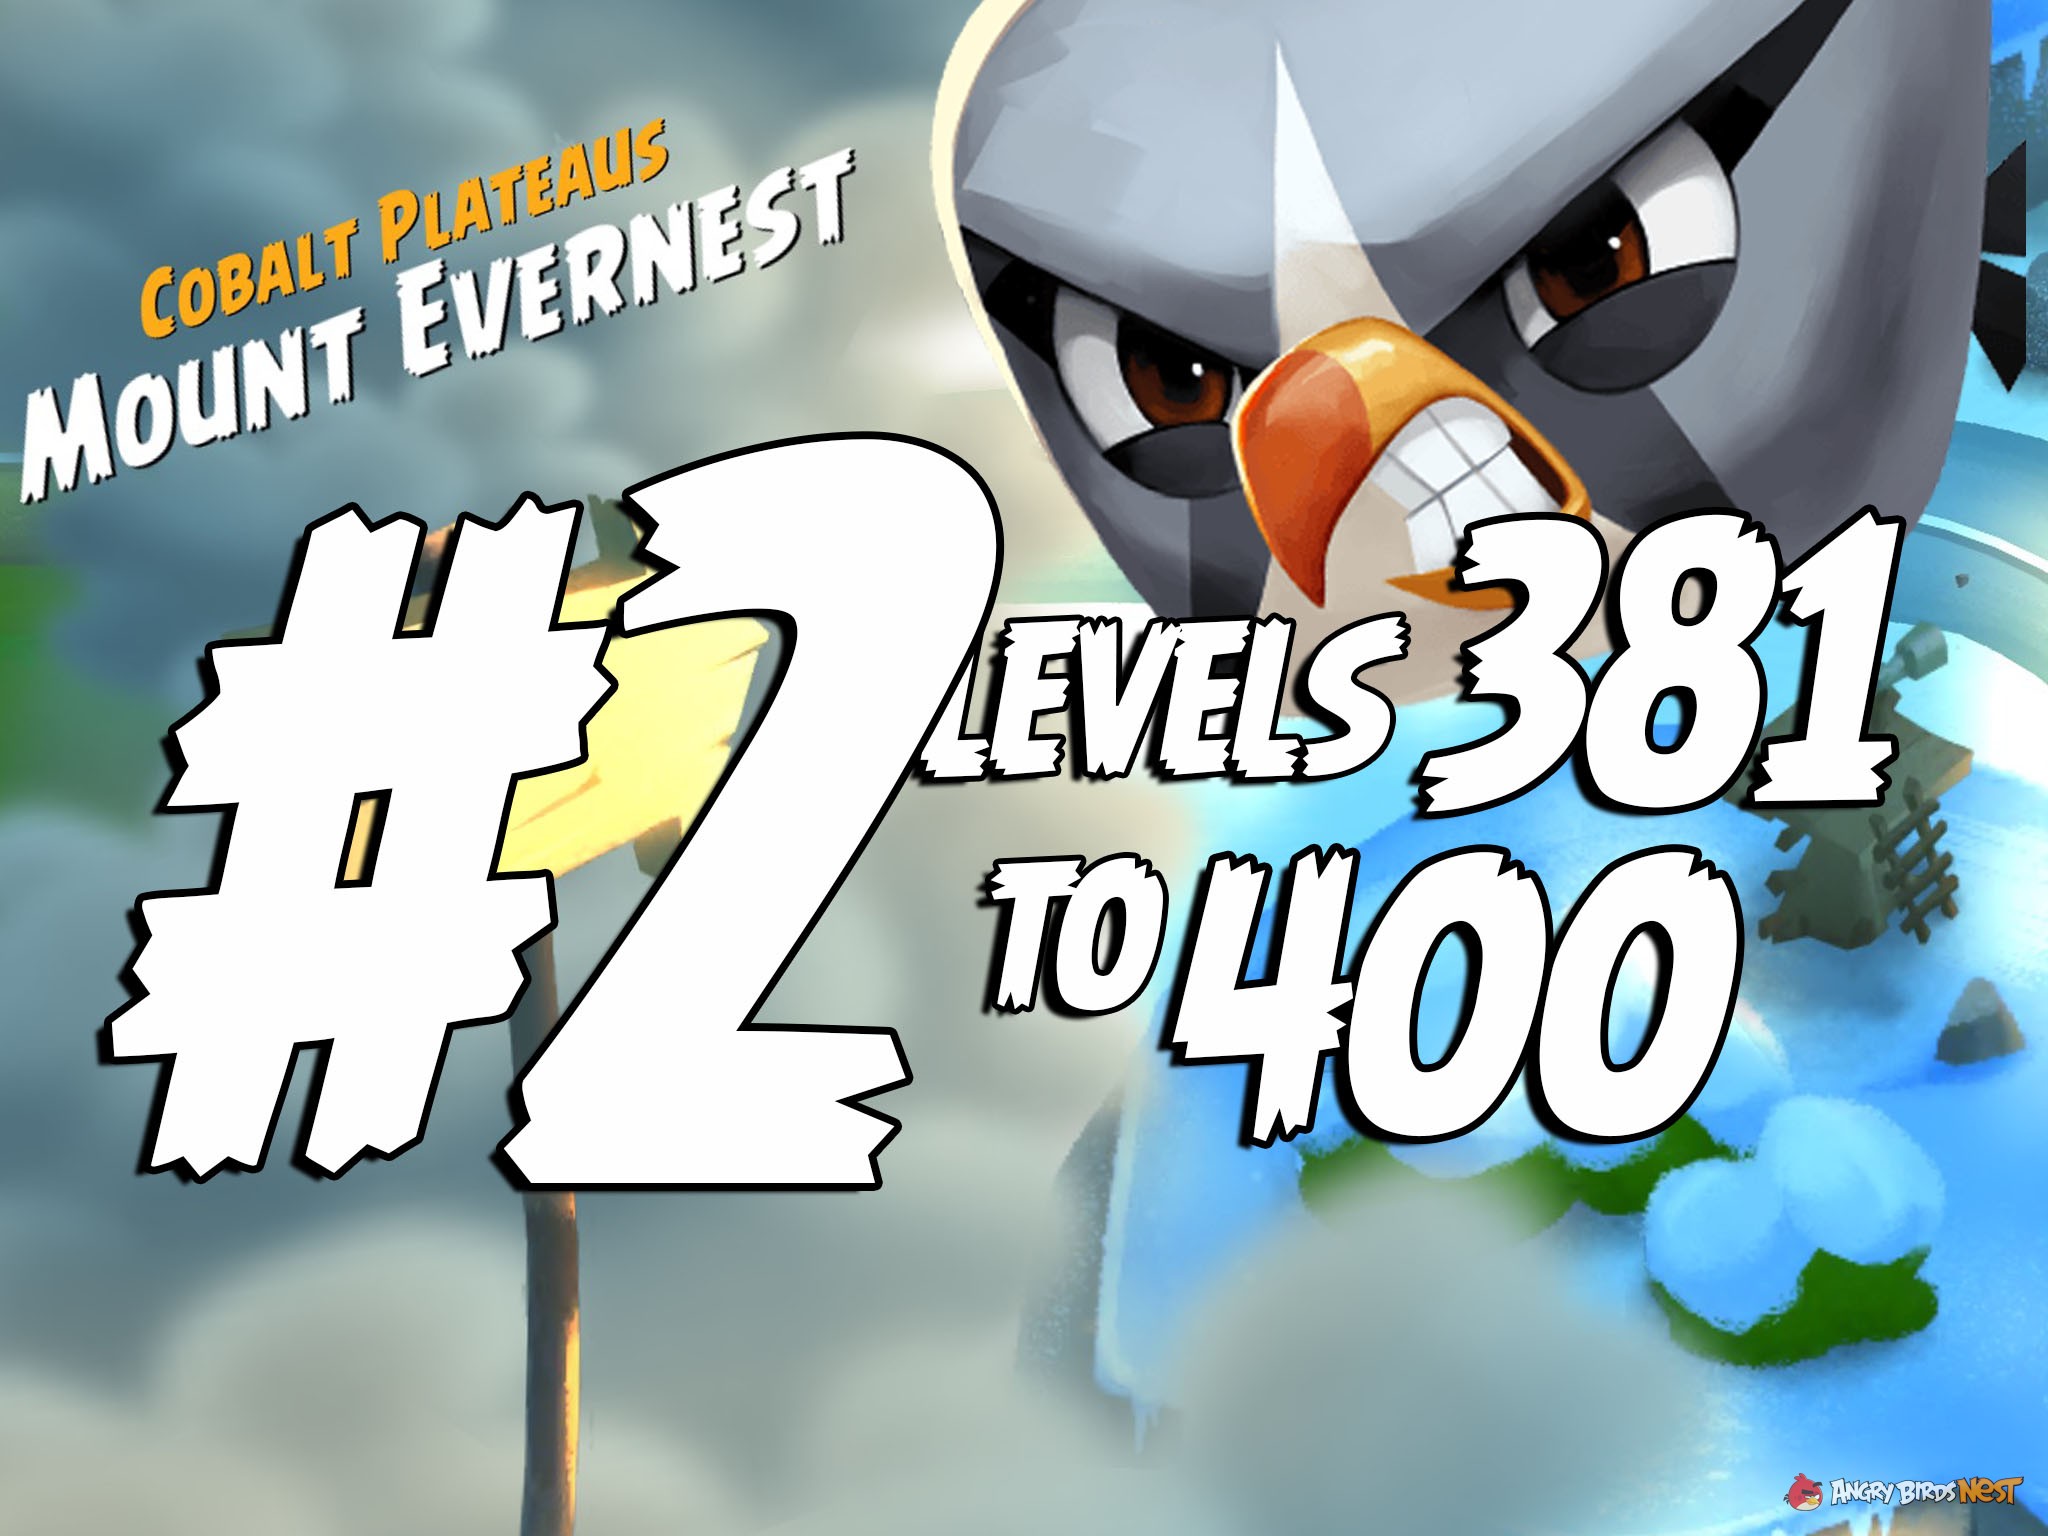 Angry Birds 2 Compilation video Mount Evernest Part 2